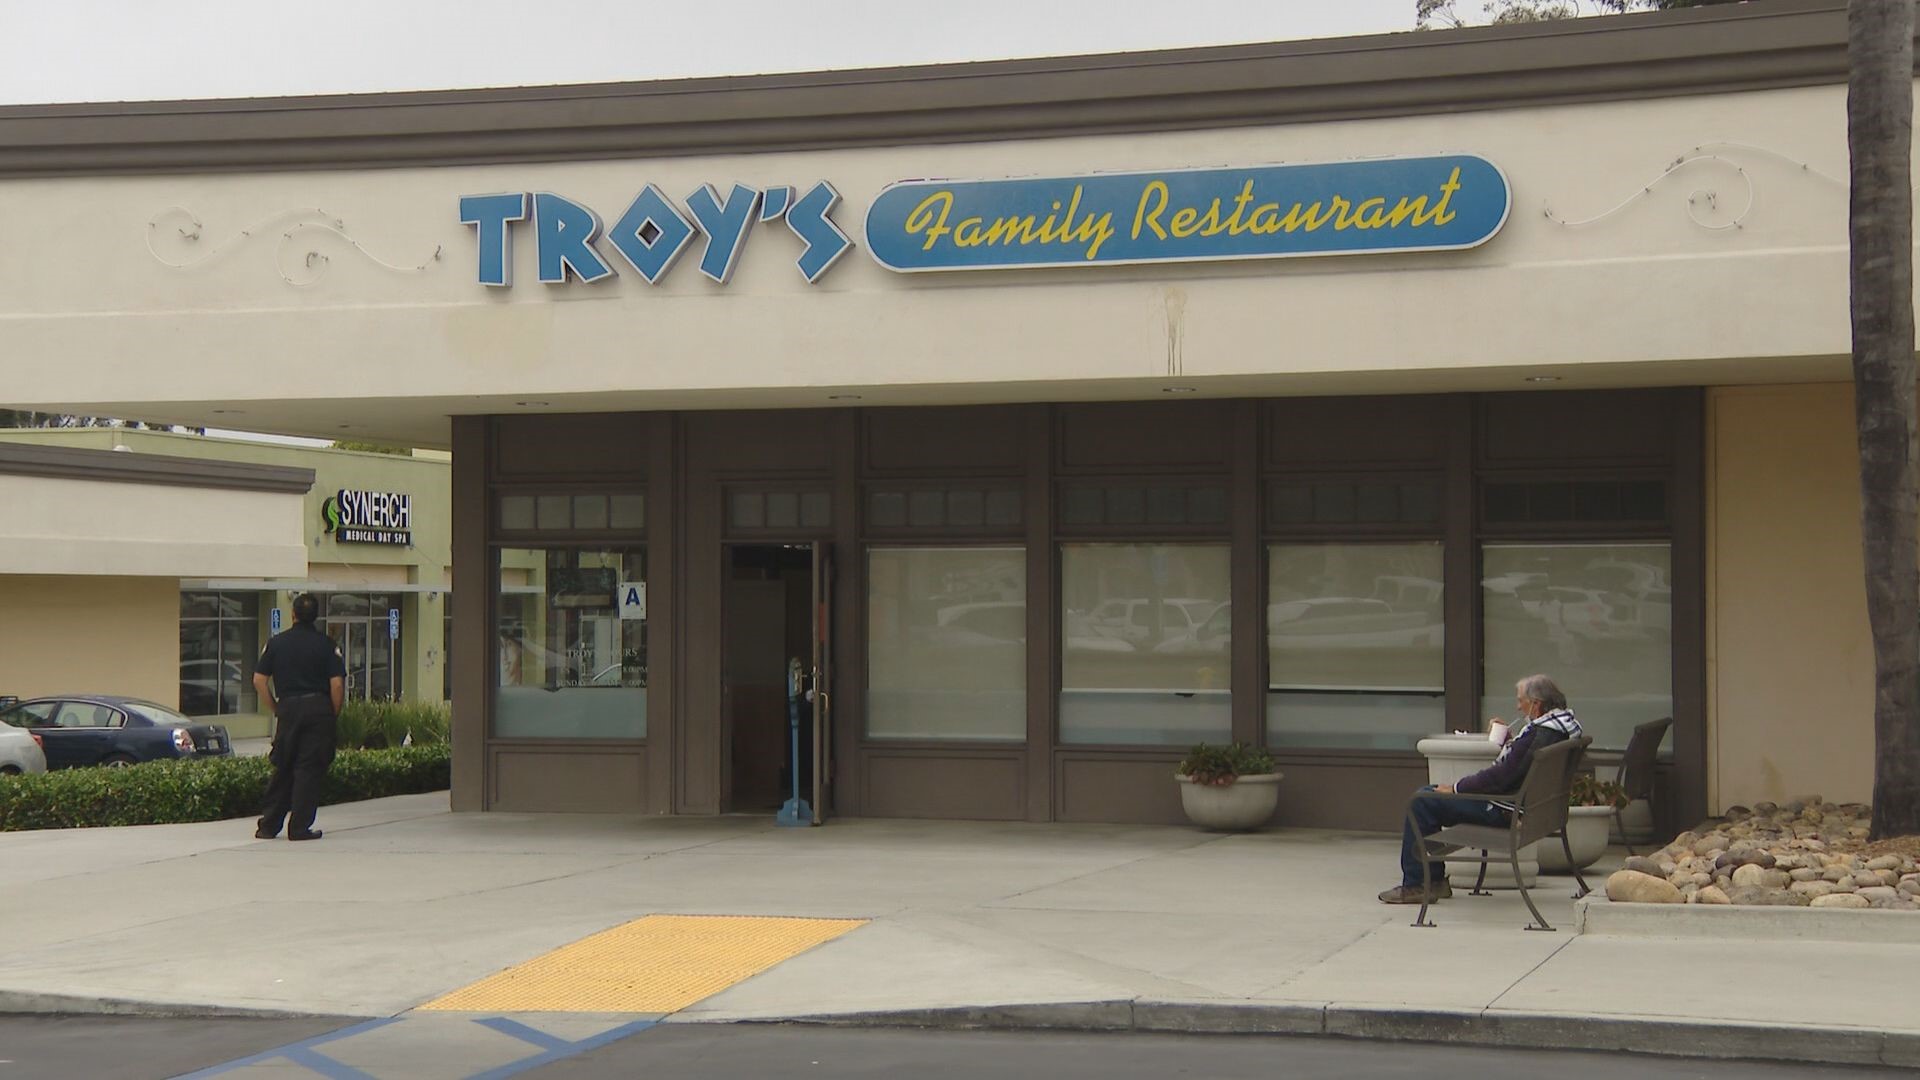 The restaurant located in Clairemont Town Square has been around for 46 years. They say the never heard back after applying for a PPP loan through Wells Fargo.